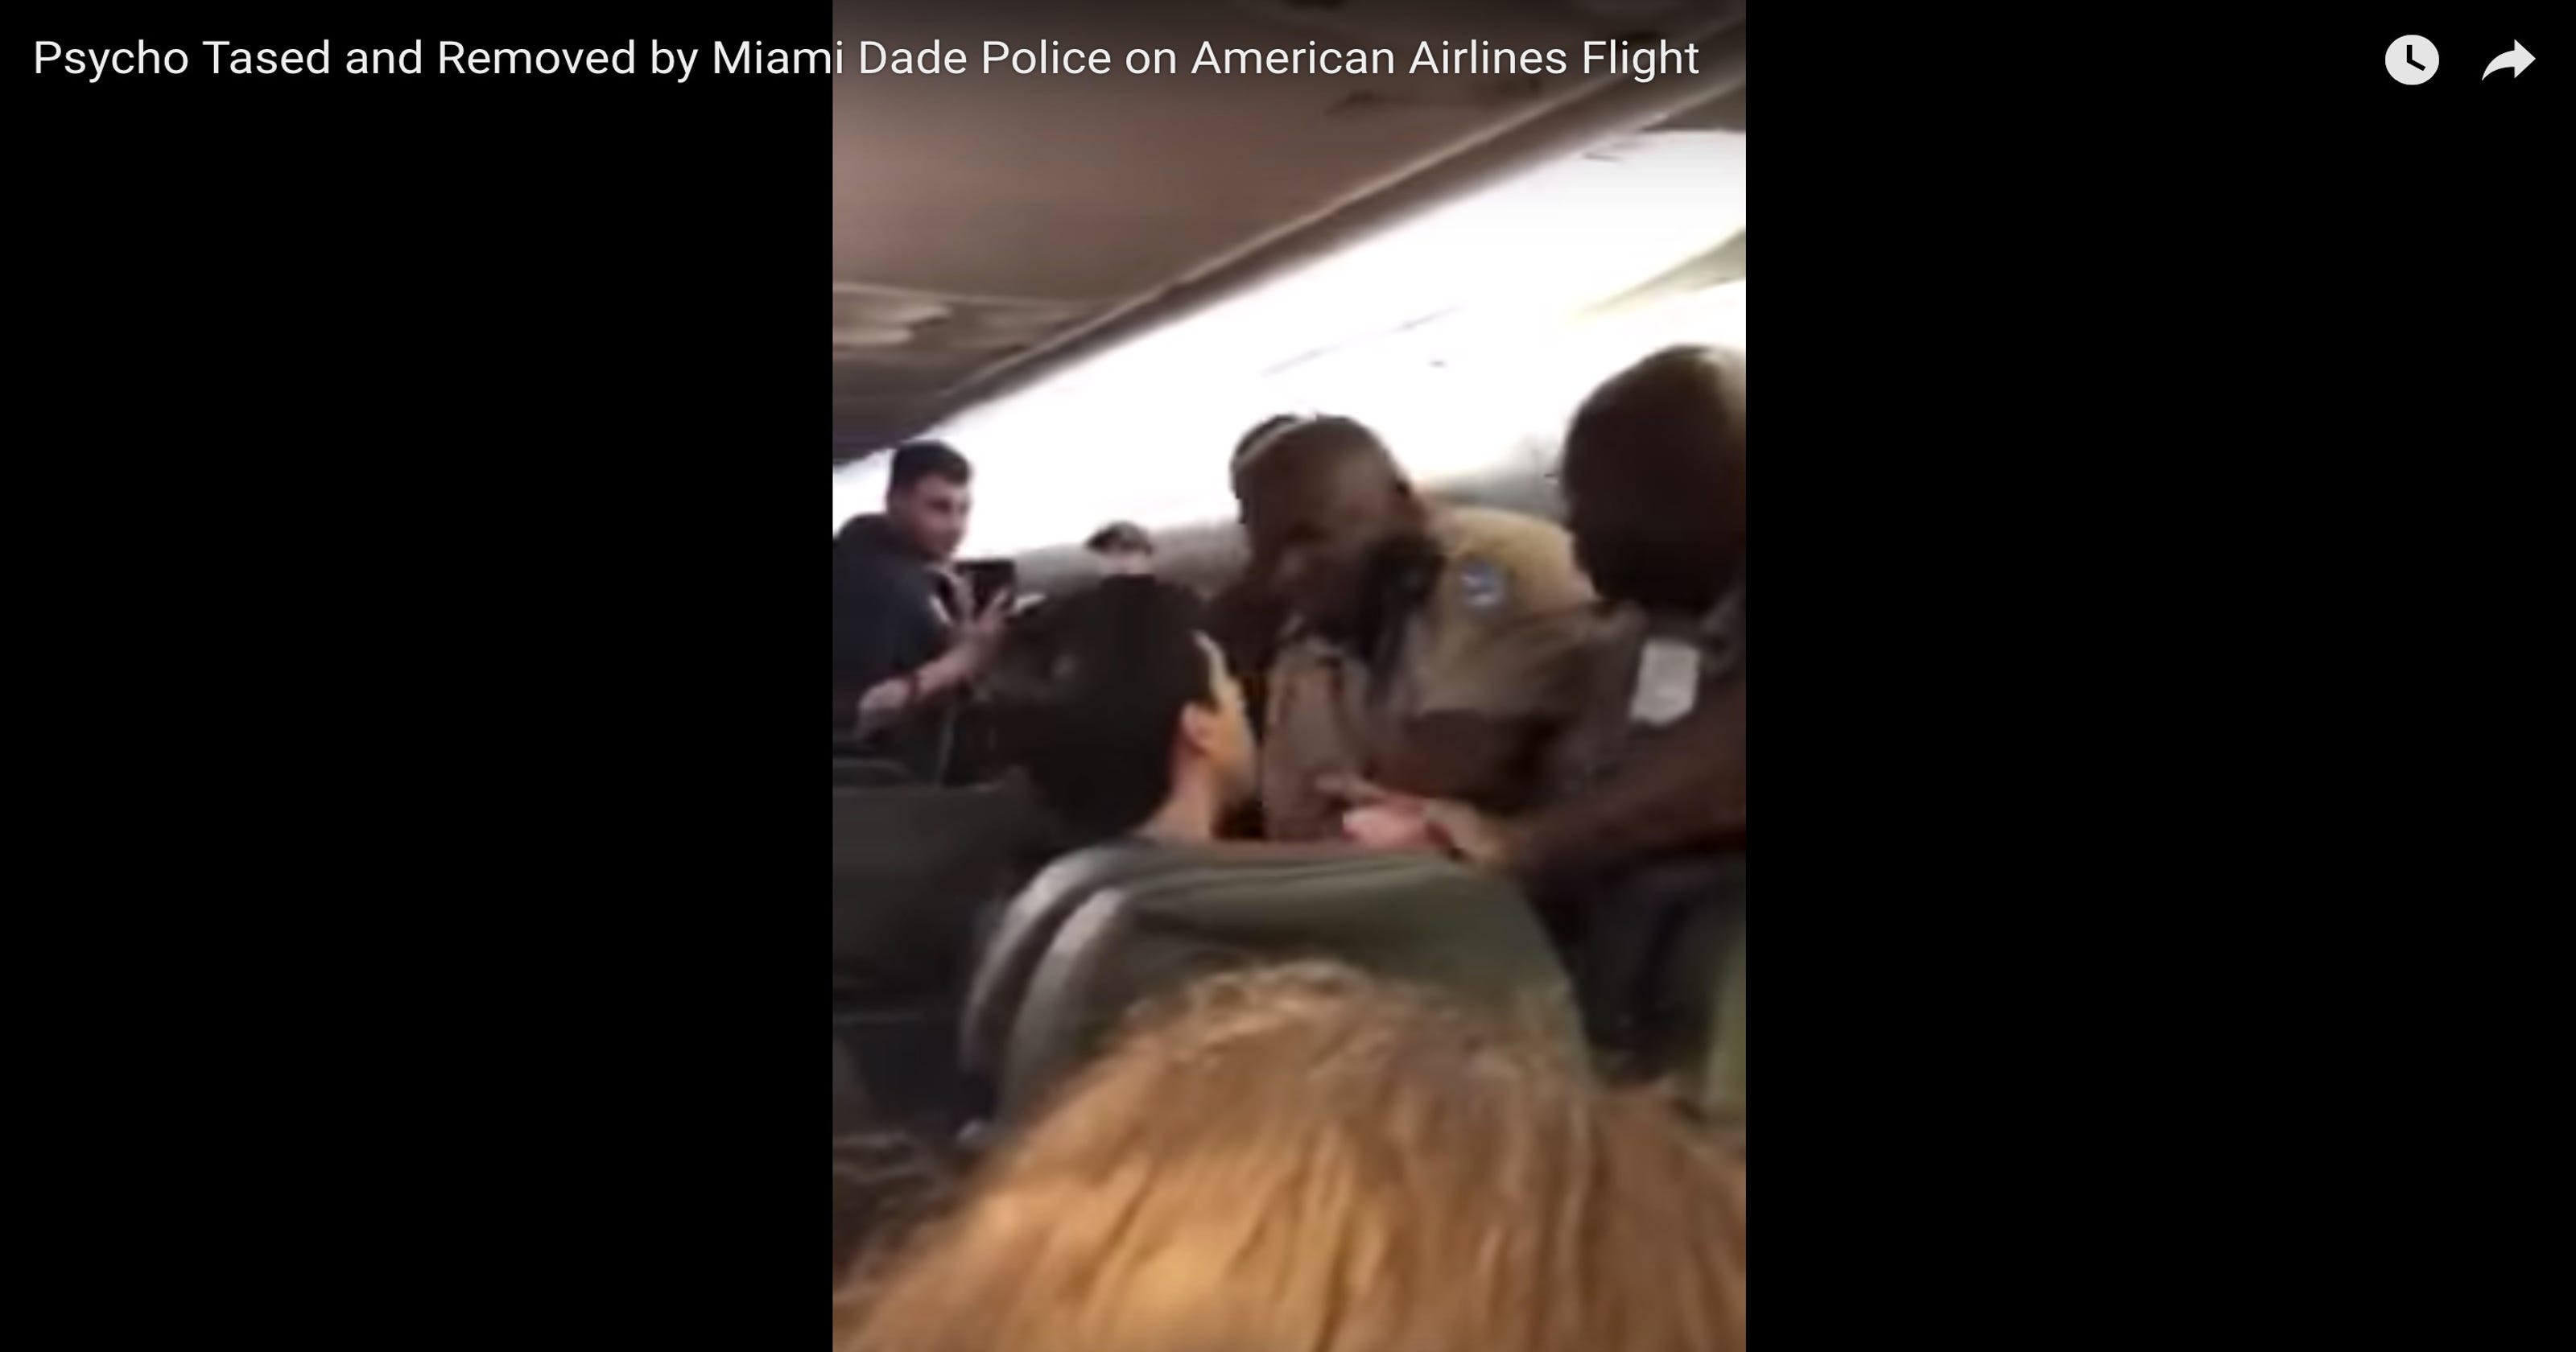 American Airlines passenger tased 10 times, removed from plane